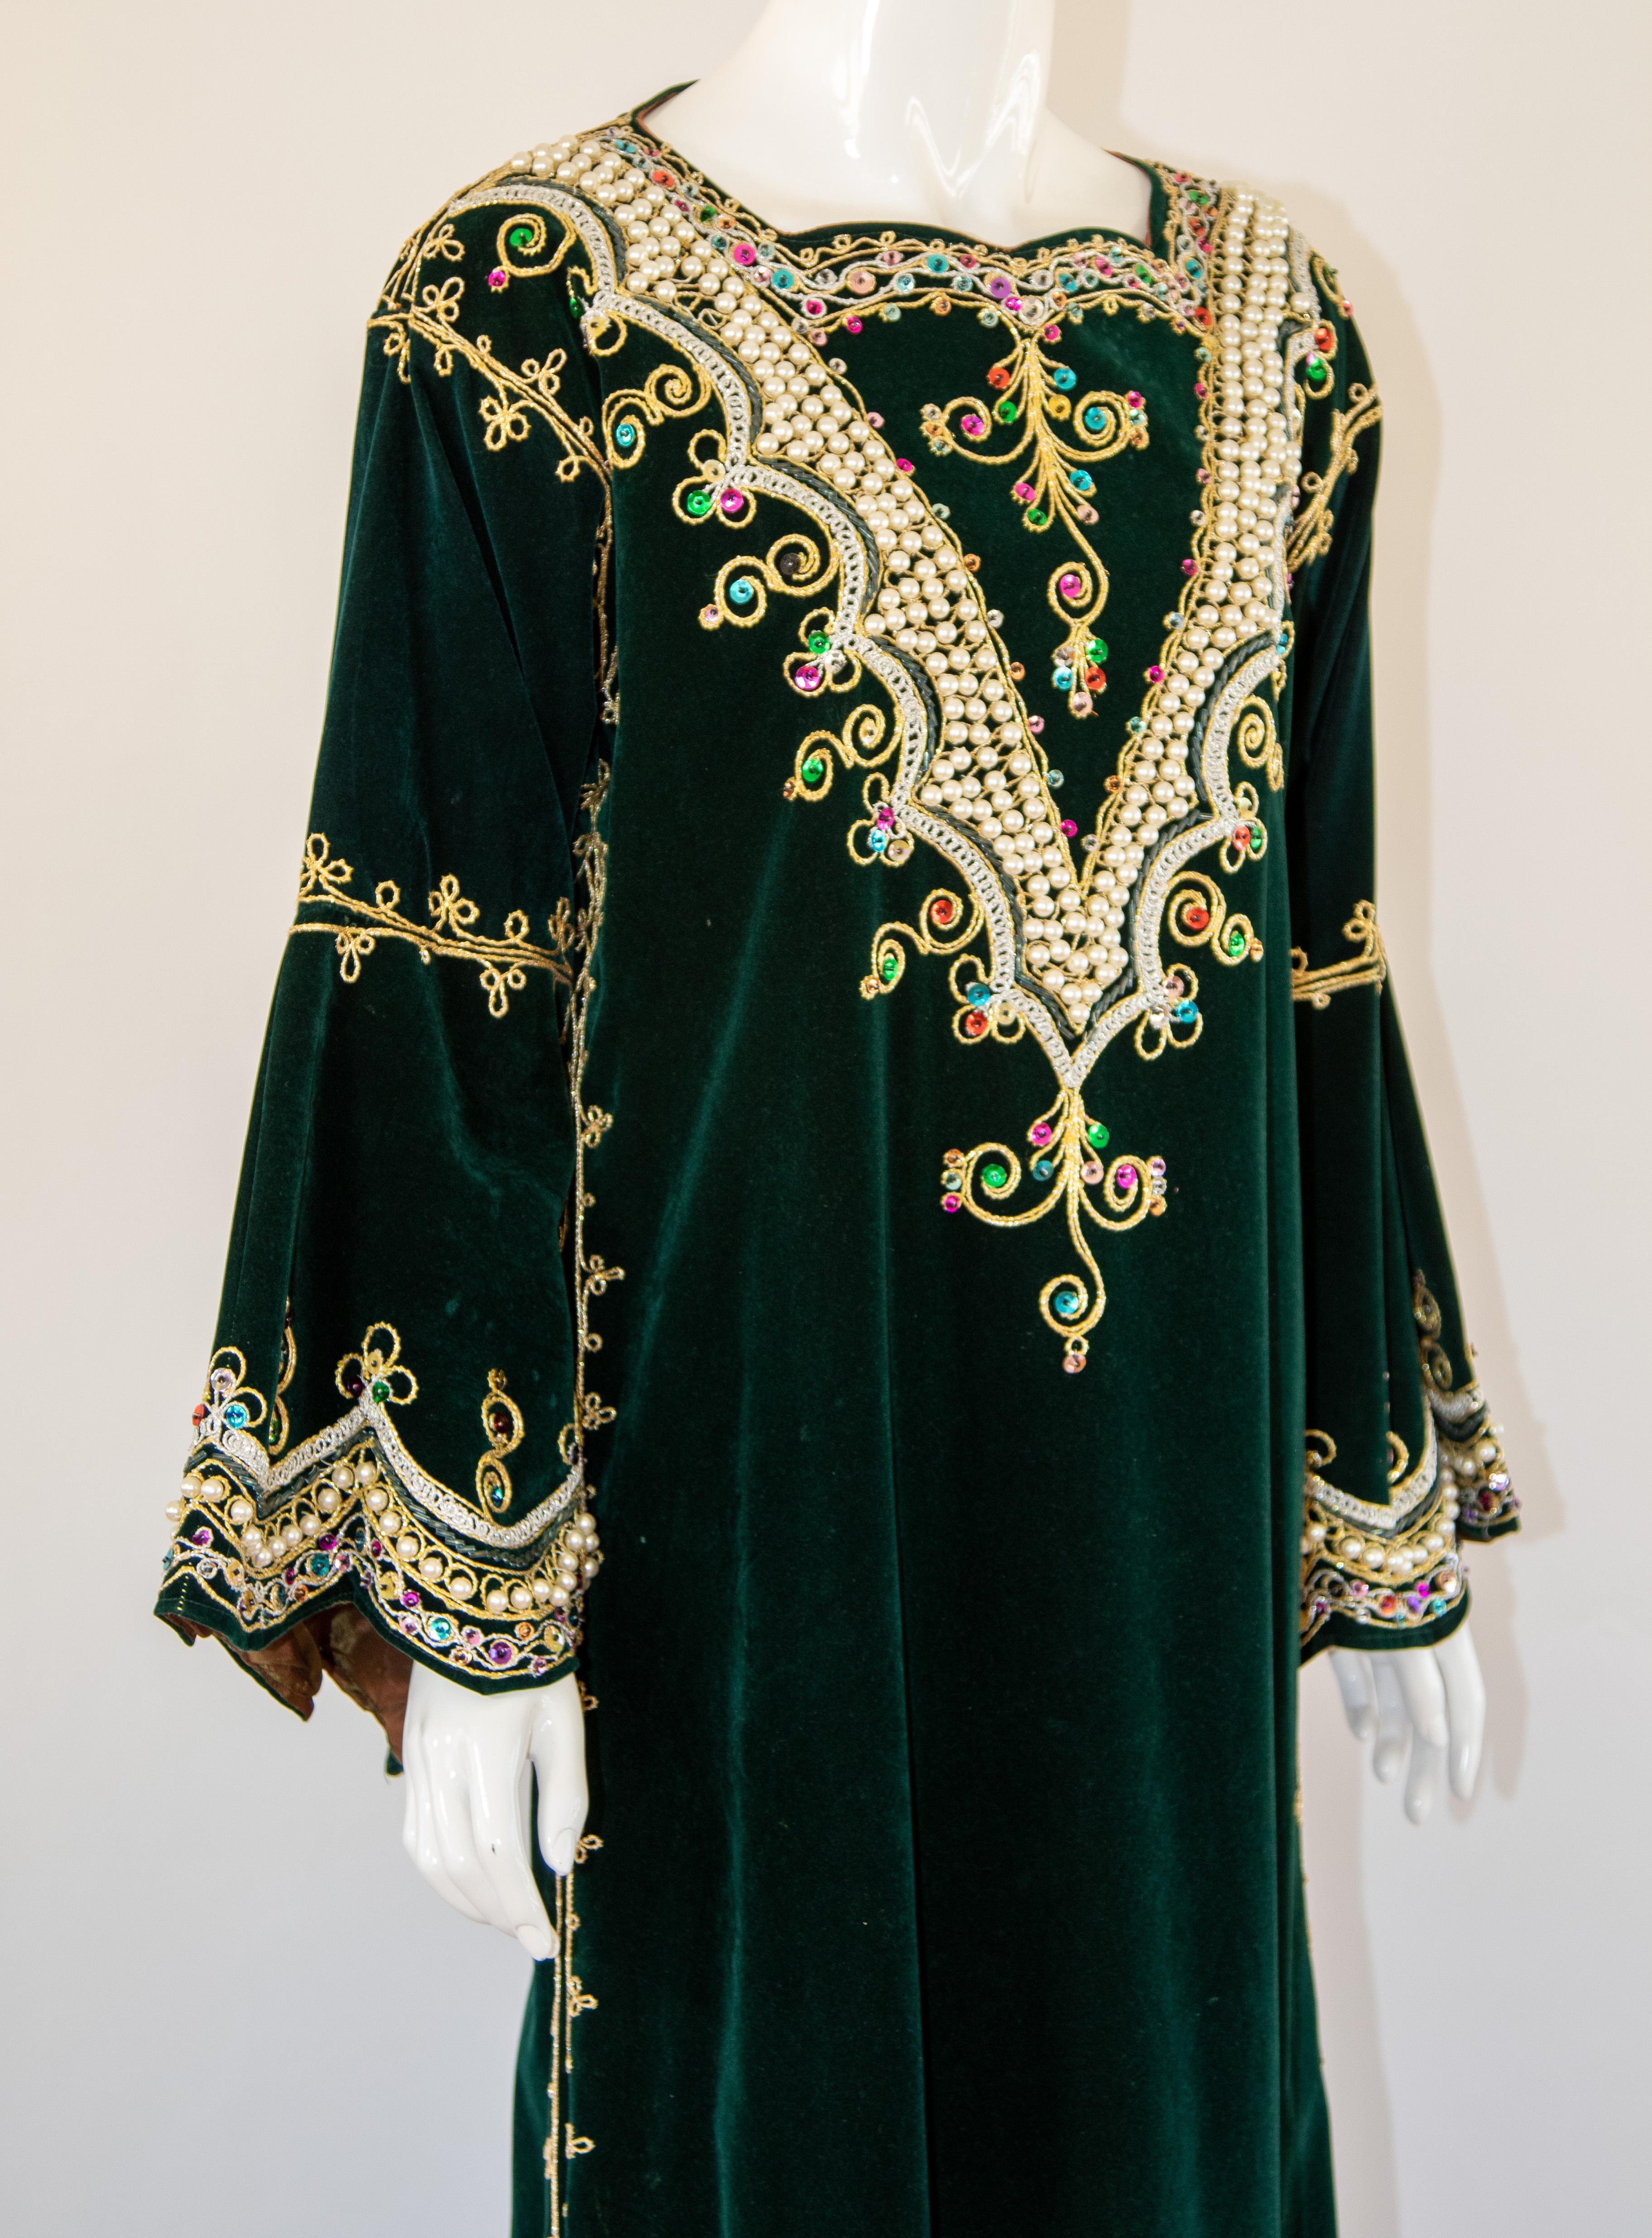 The Bindalli Caftan is a garment made for special occasions such as weddings. 
Bindallis were worn by the bride, and her female family and friends. 
Marked by elaborate floral designs bindallis were decorated with dival embroidery, a technique in